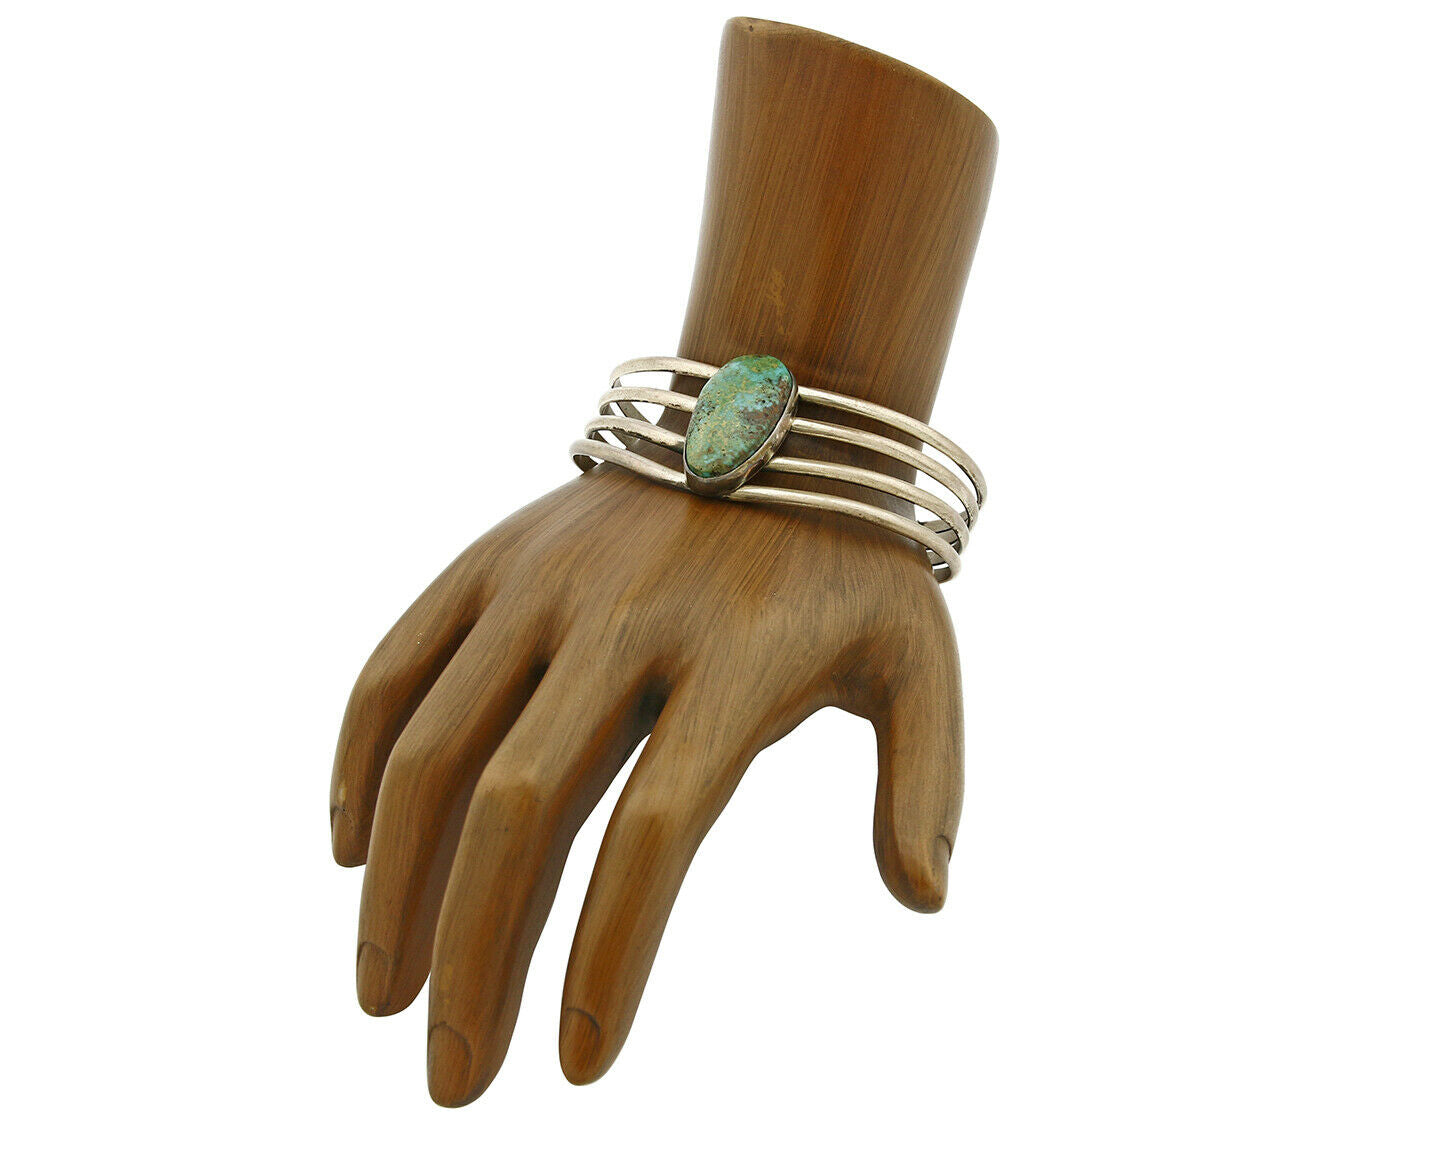 Navajo Handmade 4 Row .925 Silver Natural Turquoise Cuff Bracelet